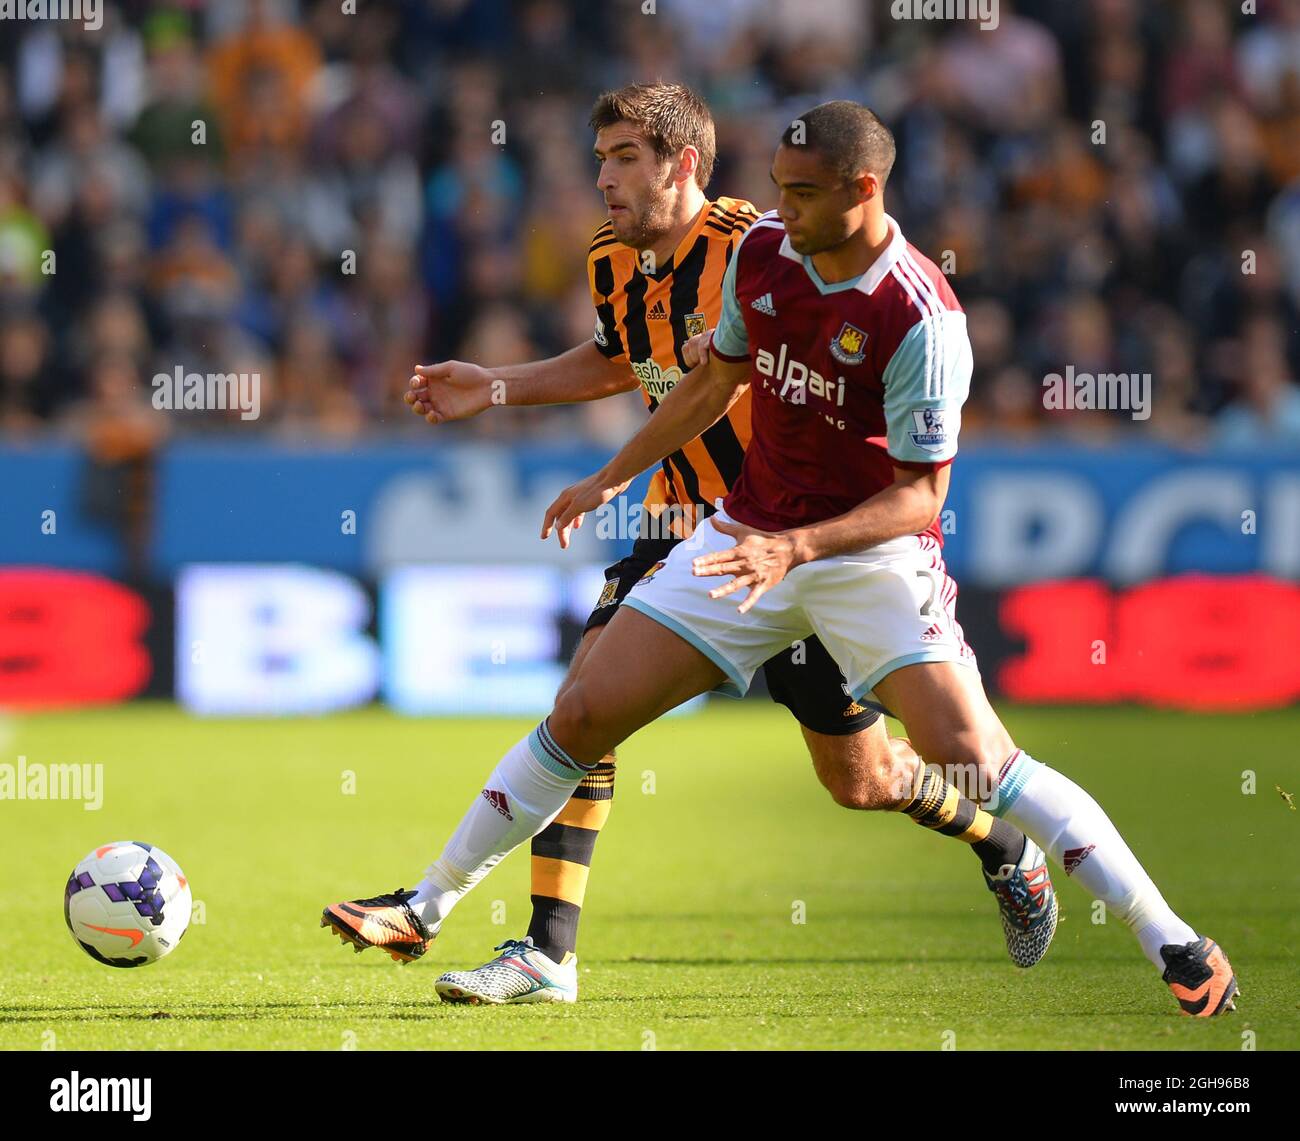 Danny Graham of Hull City tussles with Winston Reid of West Ham United during the Barclays Premier League match between Hull City and West Ham United at the Kingston Communications Stadium in Hull, United Kingdom on September 28, 2013. Stock Photo